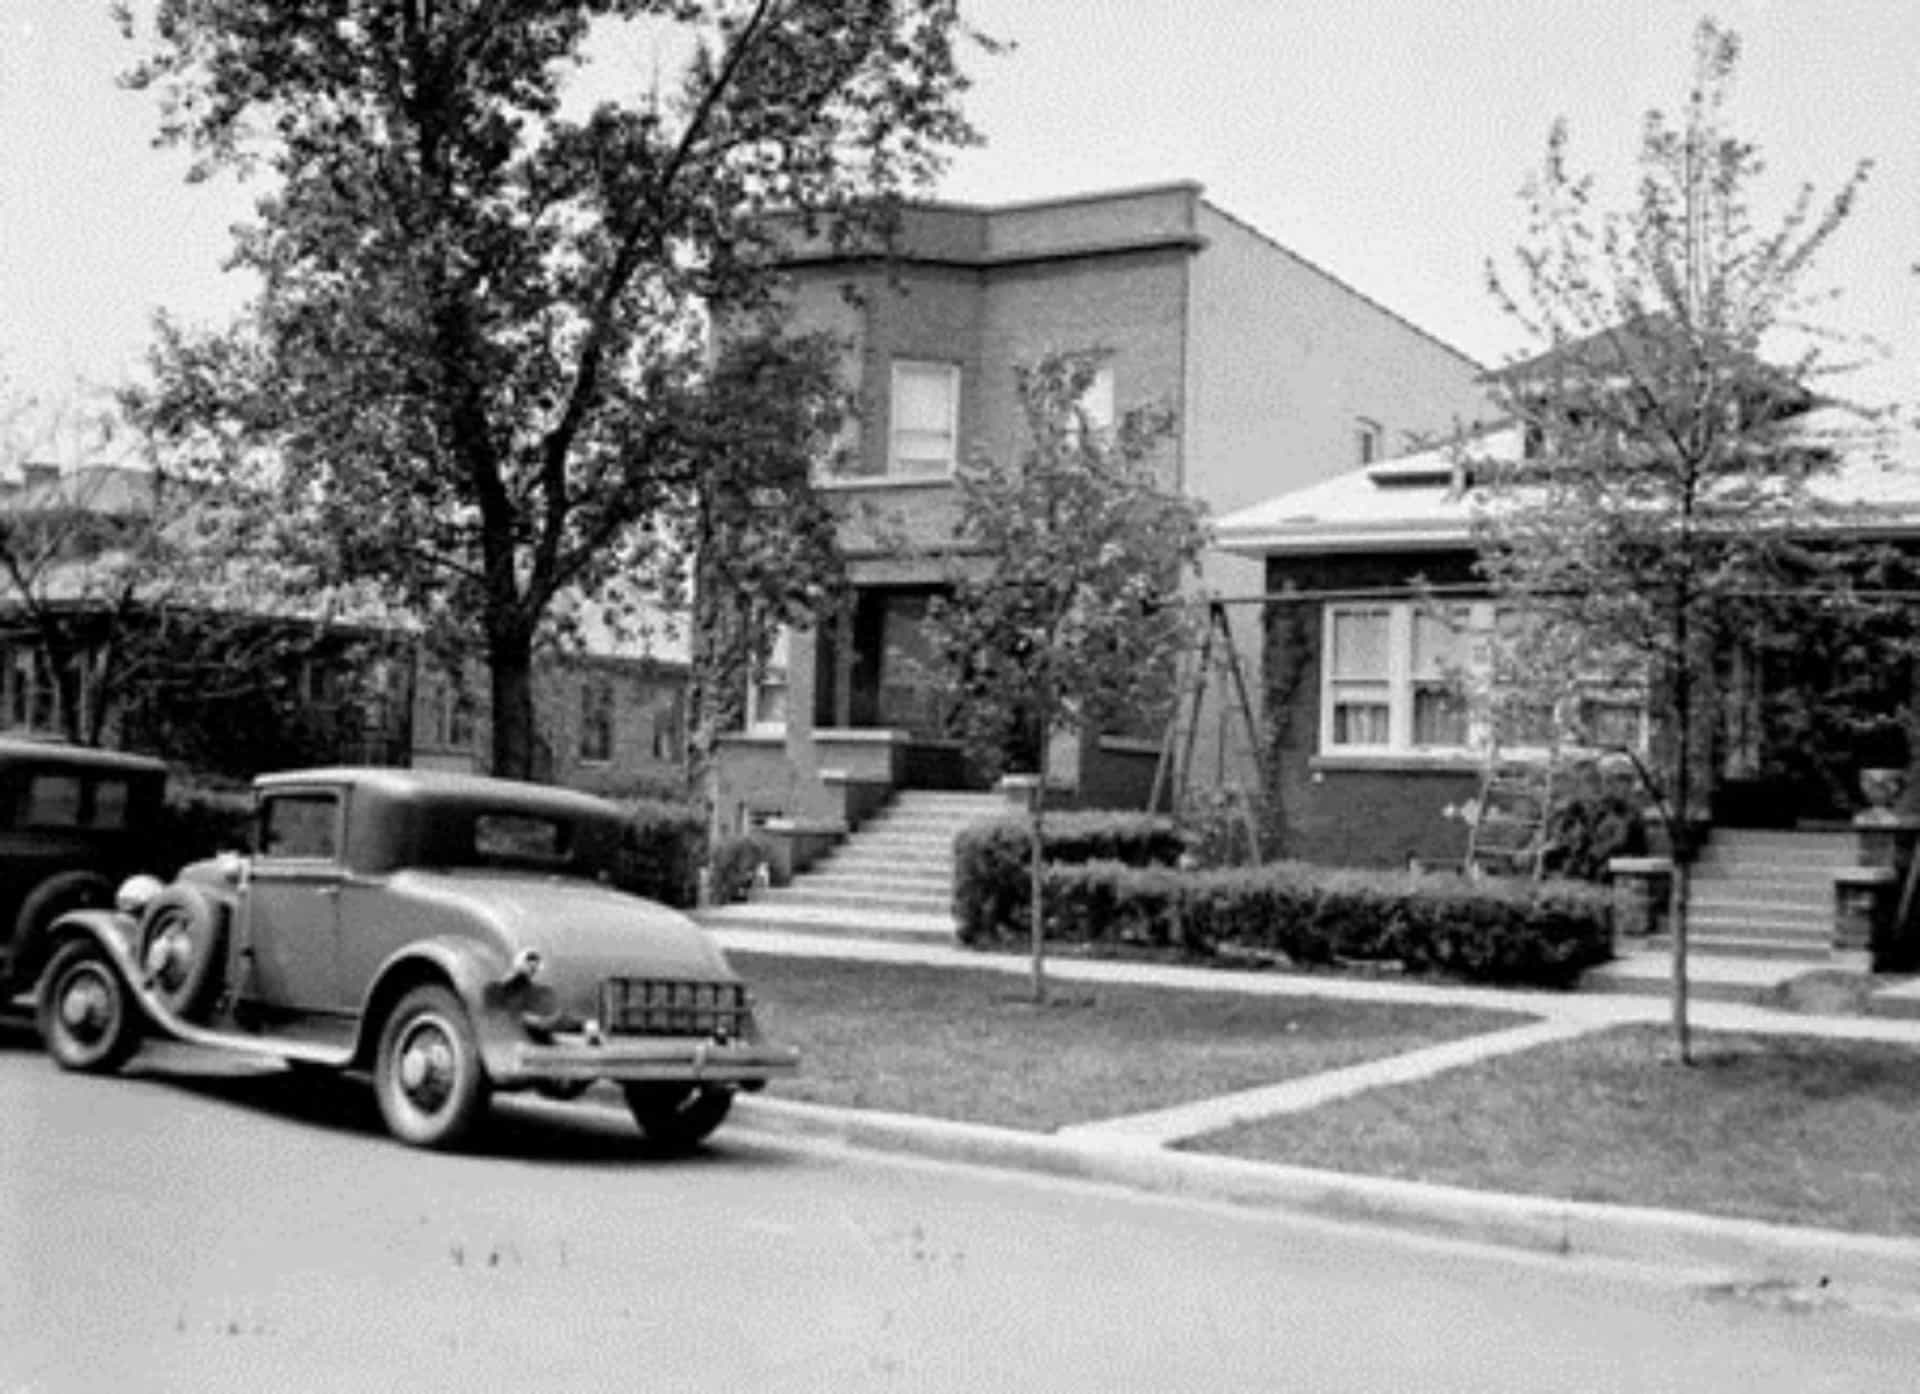 <p>But it was all a ruse. Capone used bribery and widespread intimidation to strengthen his grip on Chicago. He purchased a property at 7244 Prairie Avenue (pictured) in the Greater Grand Crossing community area of Chicago, where he lived with wife Mae and their son.</p>